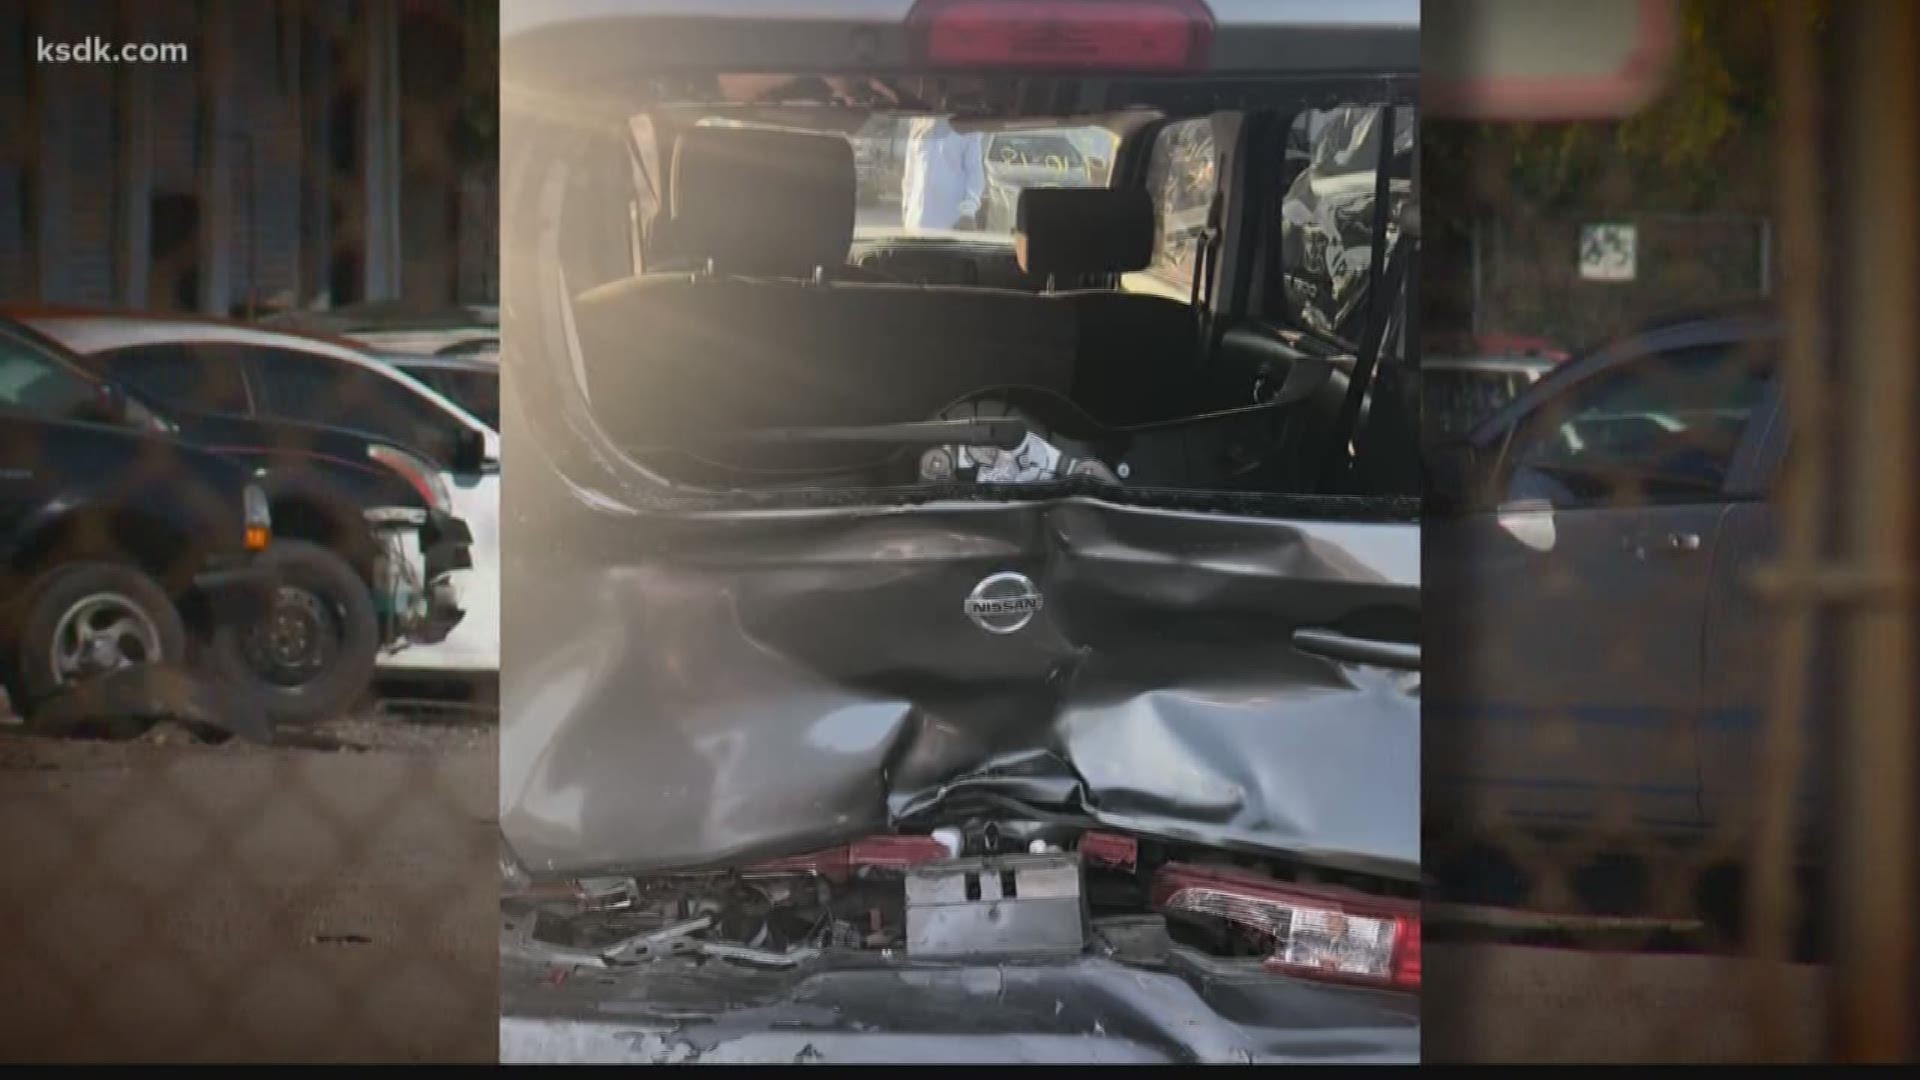 According to St. Louis Police, the city's tow truck that was carrying Butler's car was involved in a hit and run crash on Interstate 70.